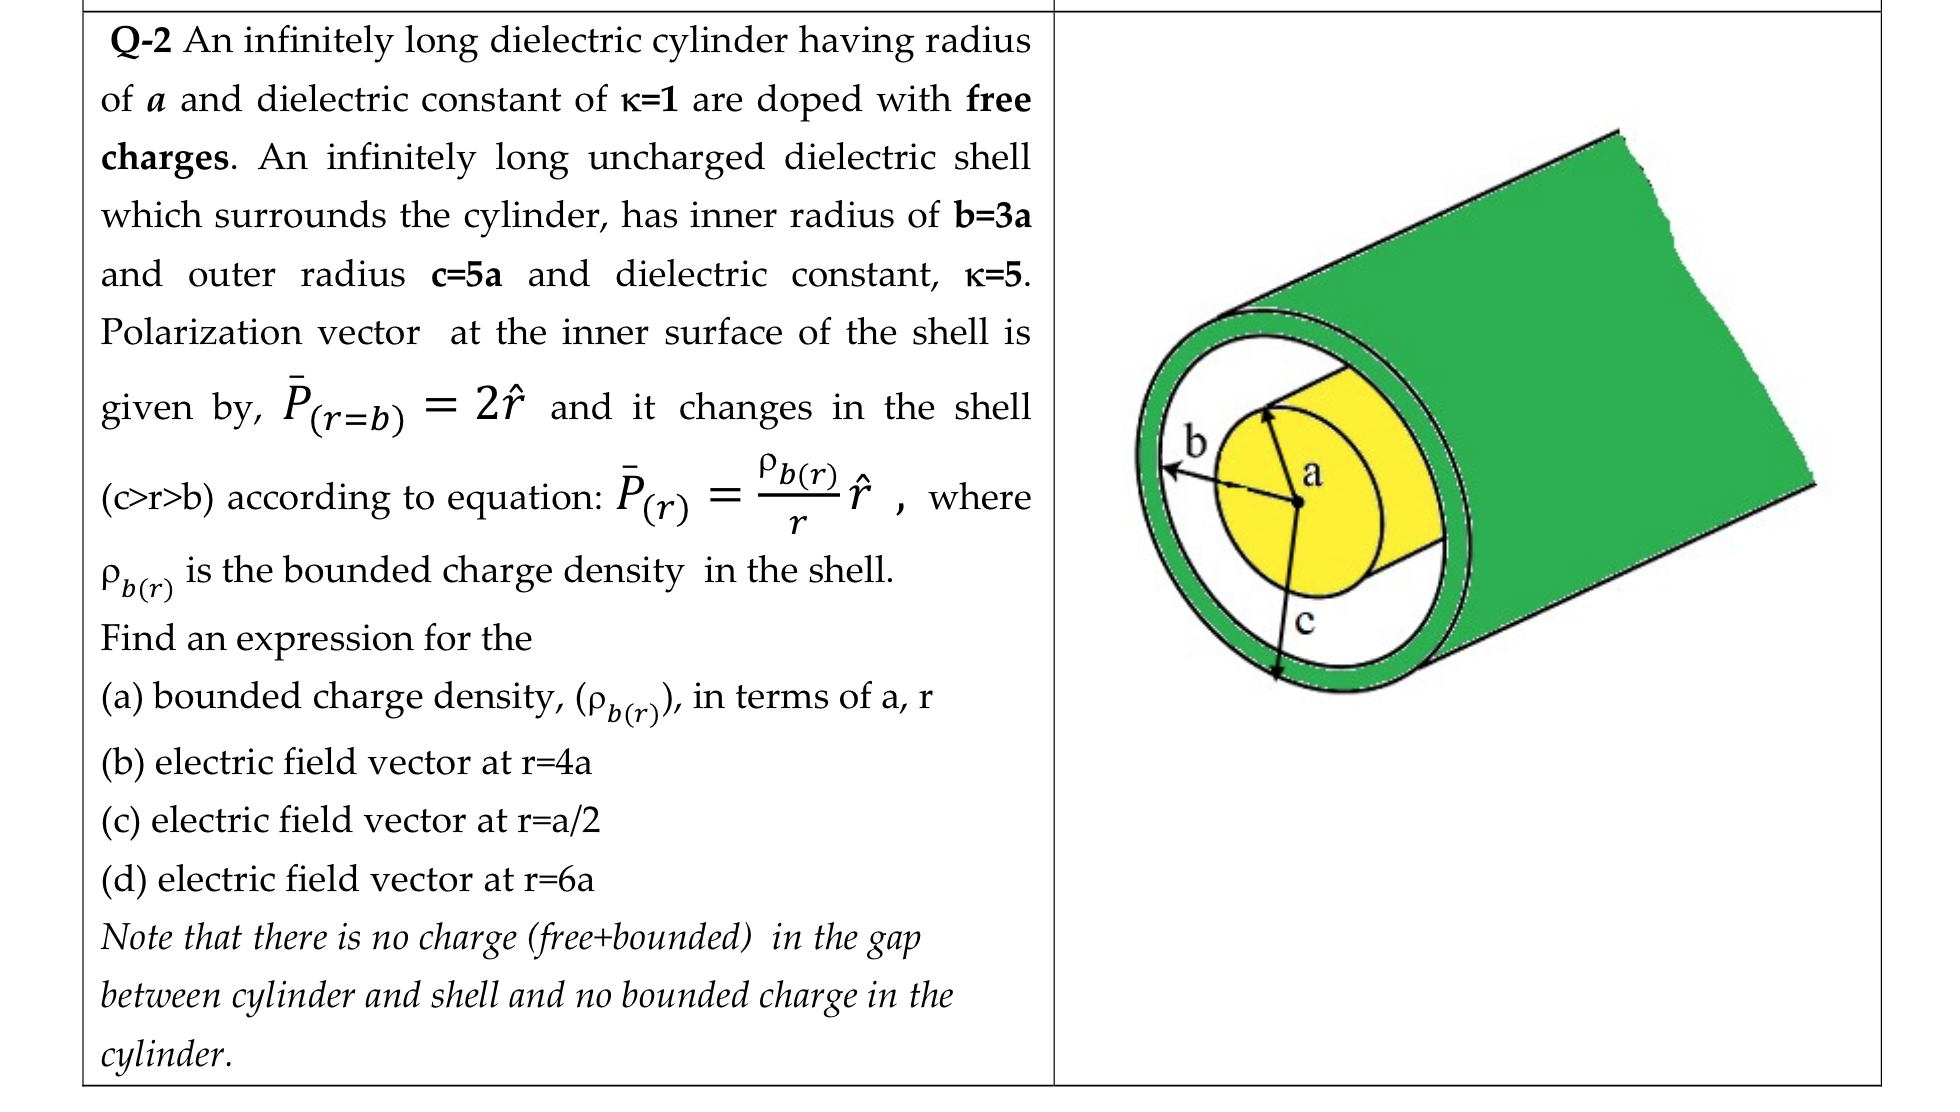 Q-2 An infinitely long dielectric cylinder having radius
of a and dielectric constant of K=1 are doped with free
charges. An infinitely long uncharged dielectric shell
which surrounds the cylinder, has inner radius of b=3a
and outer radius c=5a and dielectric constant, K=5.
Polarization vector at the inner surface of the shell is
given by, P(r=b)
= 2î and it changes in the shell
(>r>b) according to equation: P(r)
mộ, where
a
r
Pb(r)
is the bounded charge density in the shell.
Find an expression for the
(a) bounded charge density, (p,o), in terms of a, r
(b) electric field vector at r=4a
(c) electric field vector at r=a/2
(d) electric field vector at r=6a
Note that there is no charge (free+bounded) in the gap
between cylinder and shell and no bounded charge in the
cylinder.
